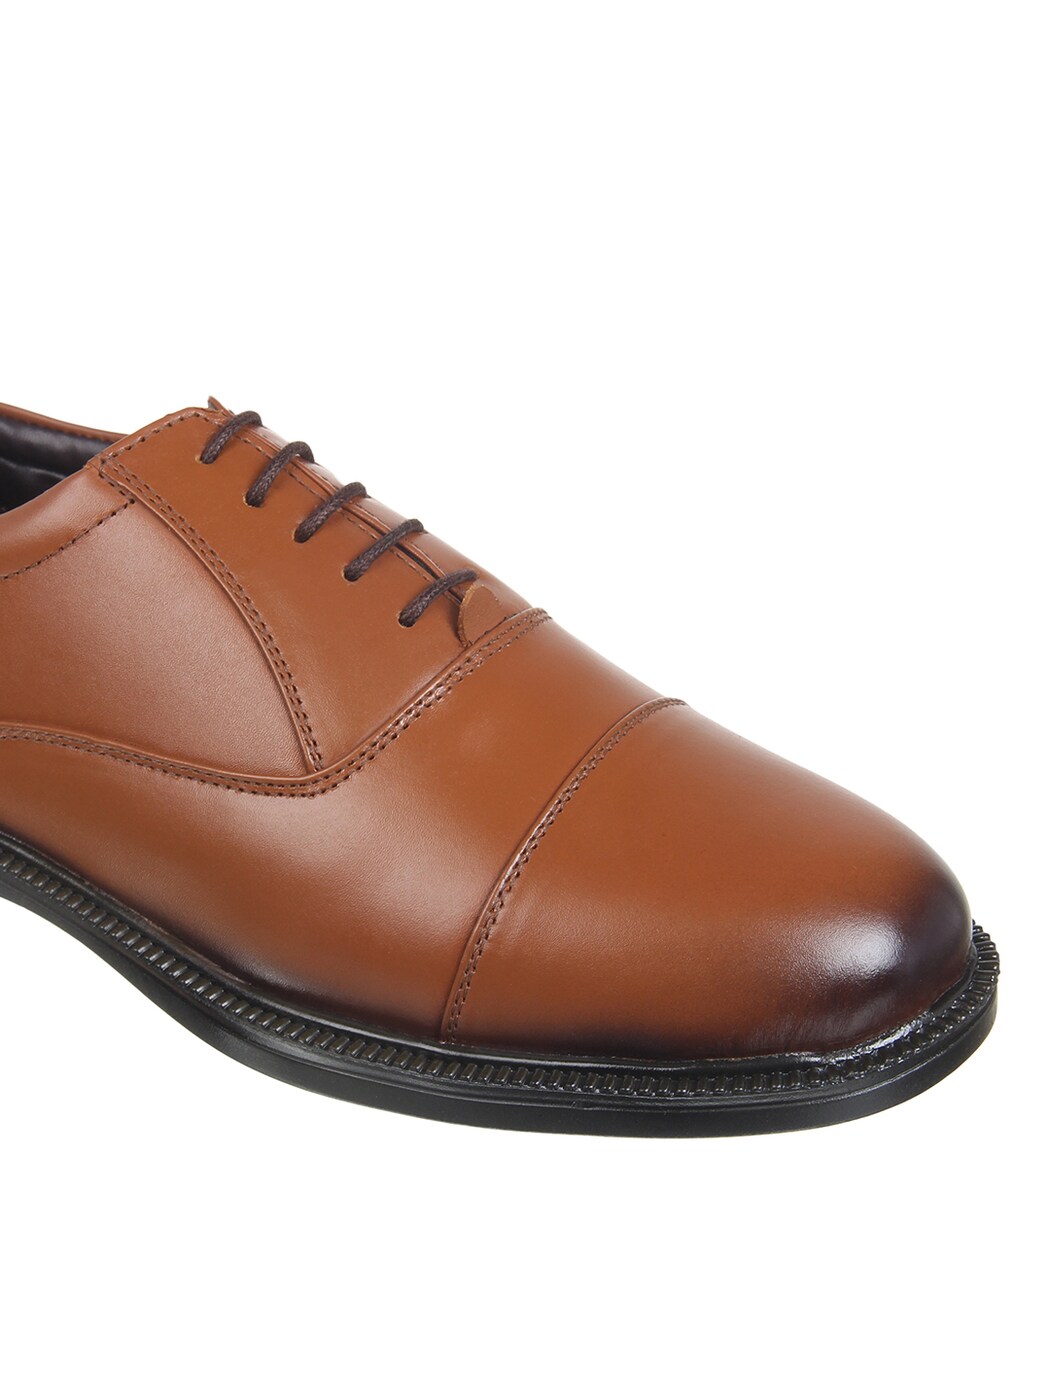 round toe oxford shoes